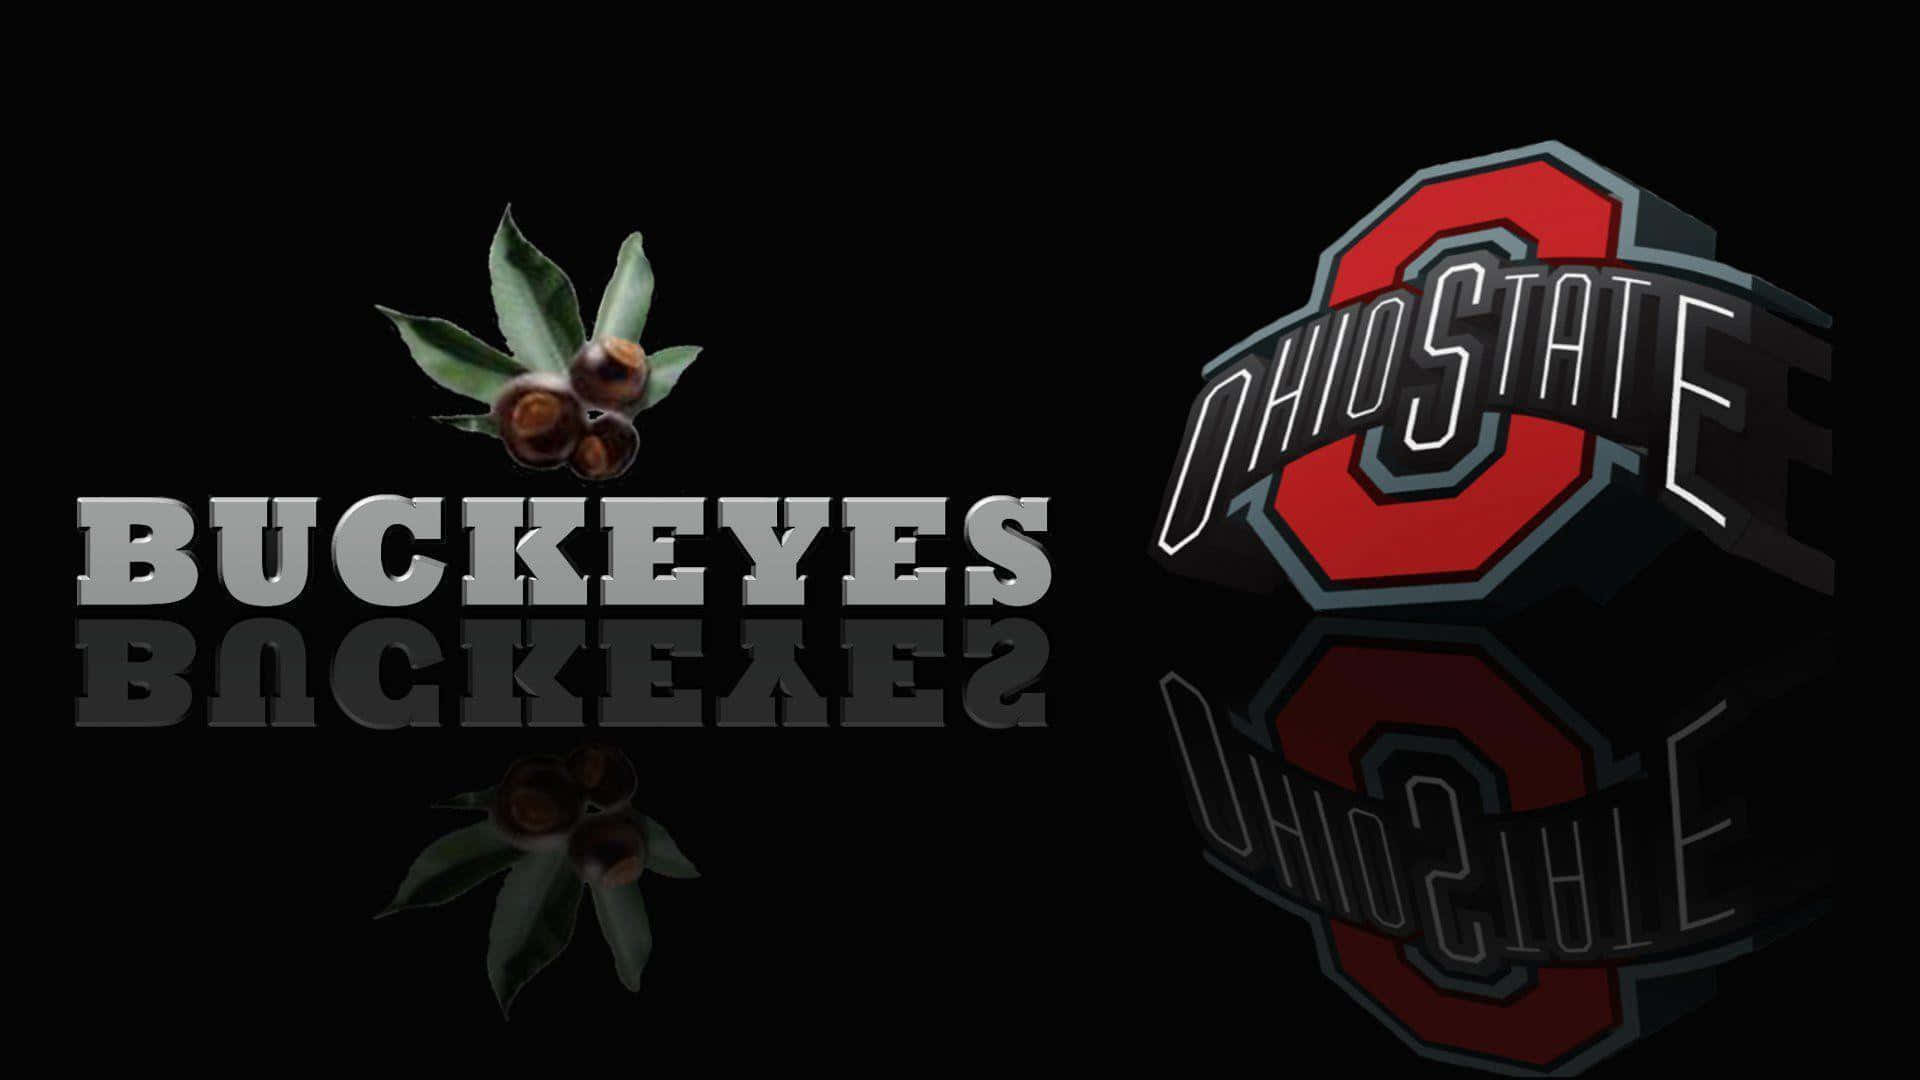 Show your Buckeyes pride with this awesome Ohio State wallpaper! Wallpaper